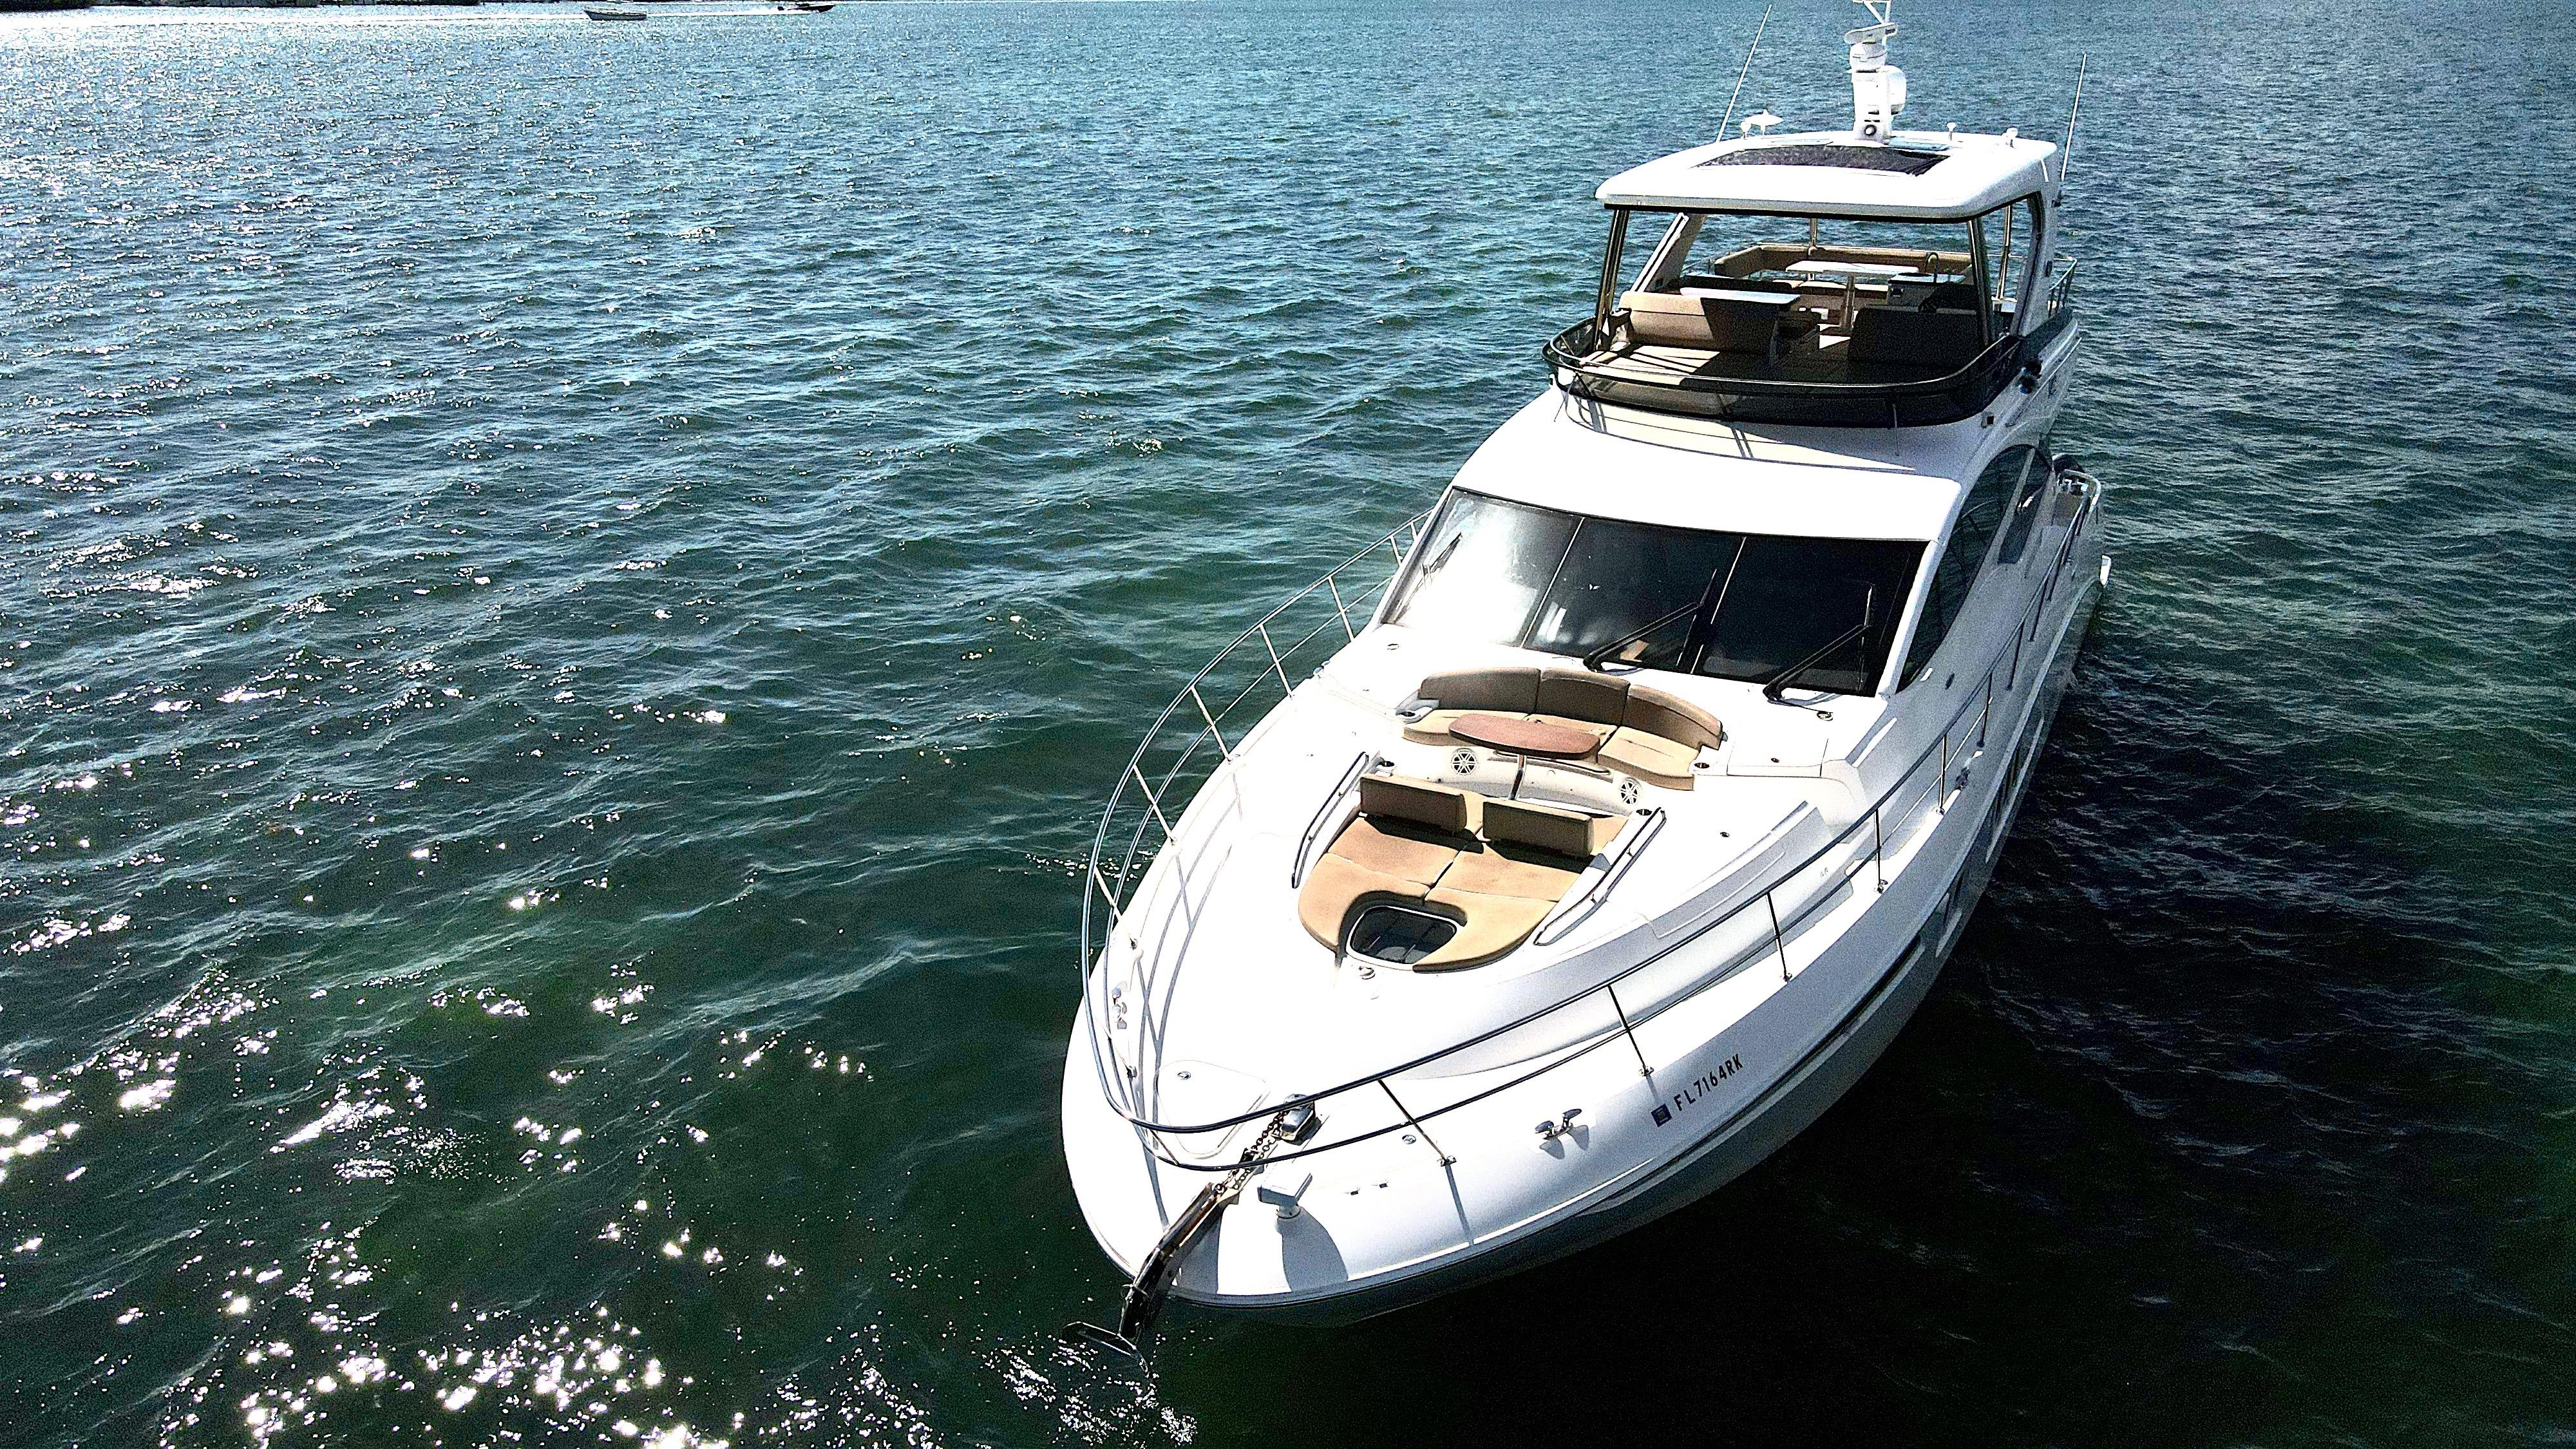 Mairas Yacht for Sale  65 Sea Ray Yachts Key Biscayne, FL